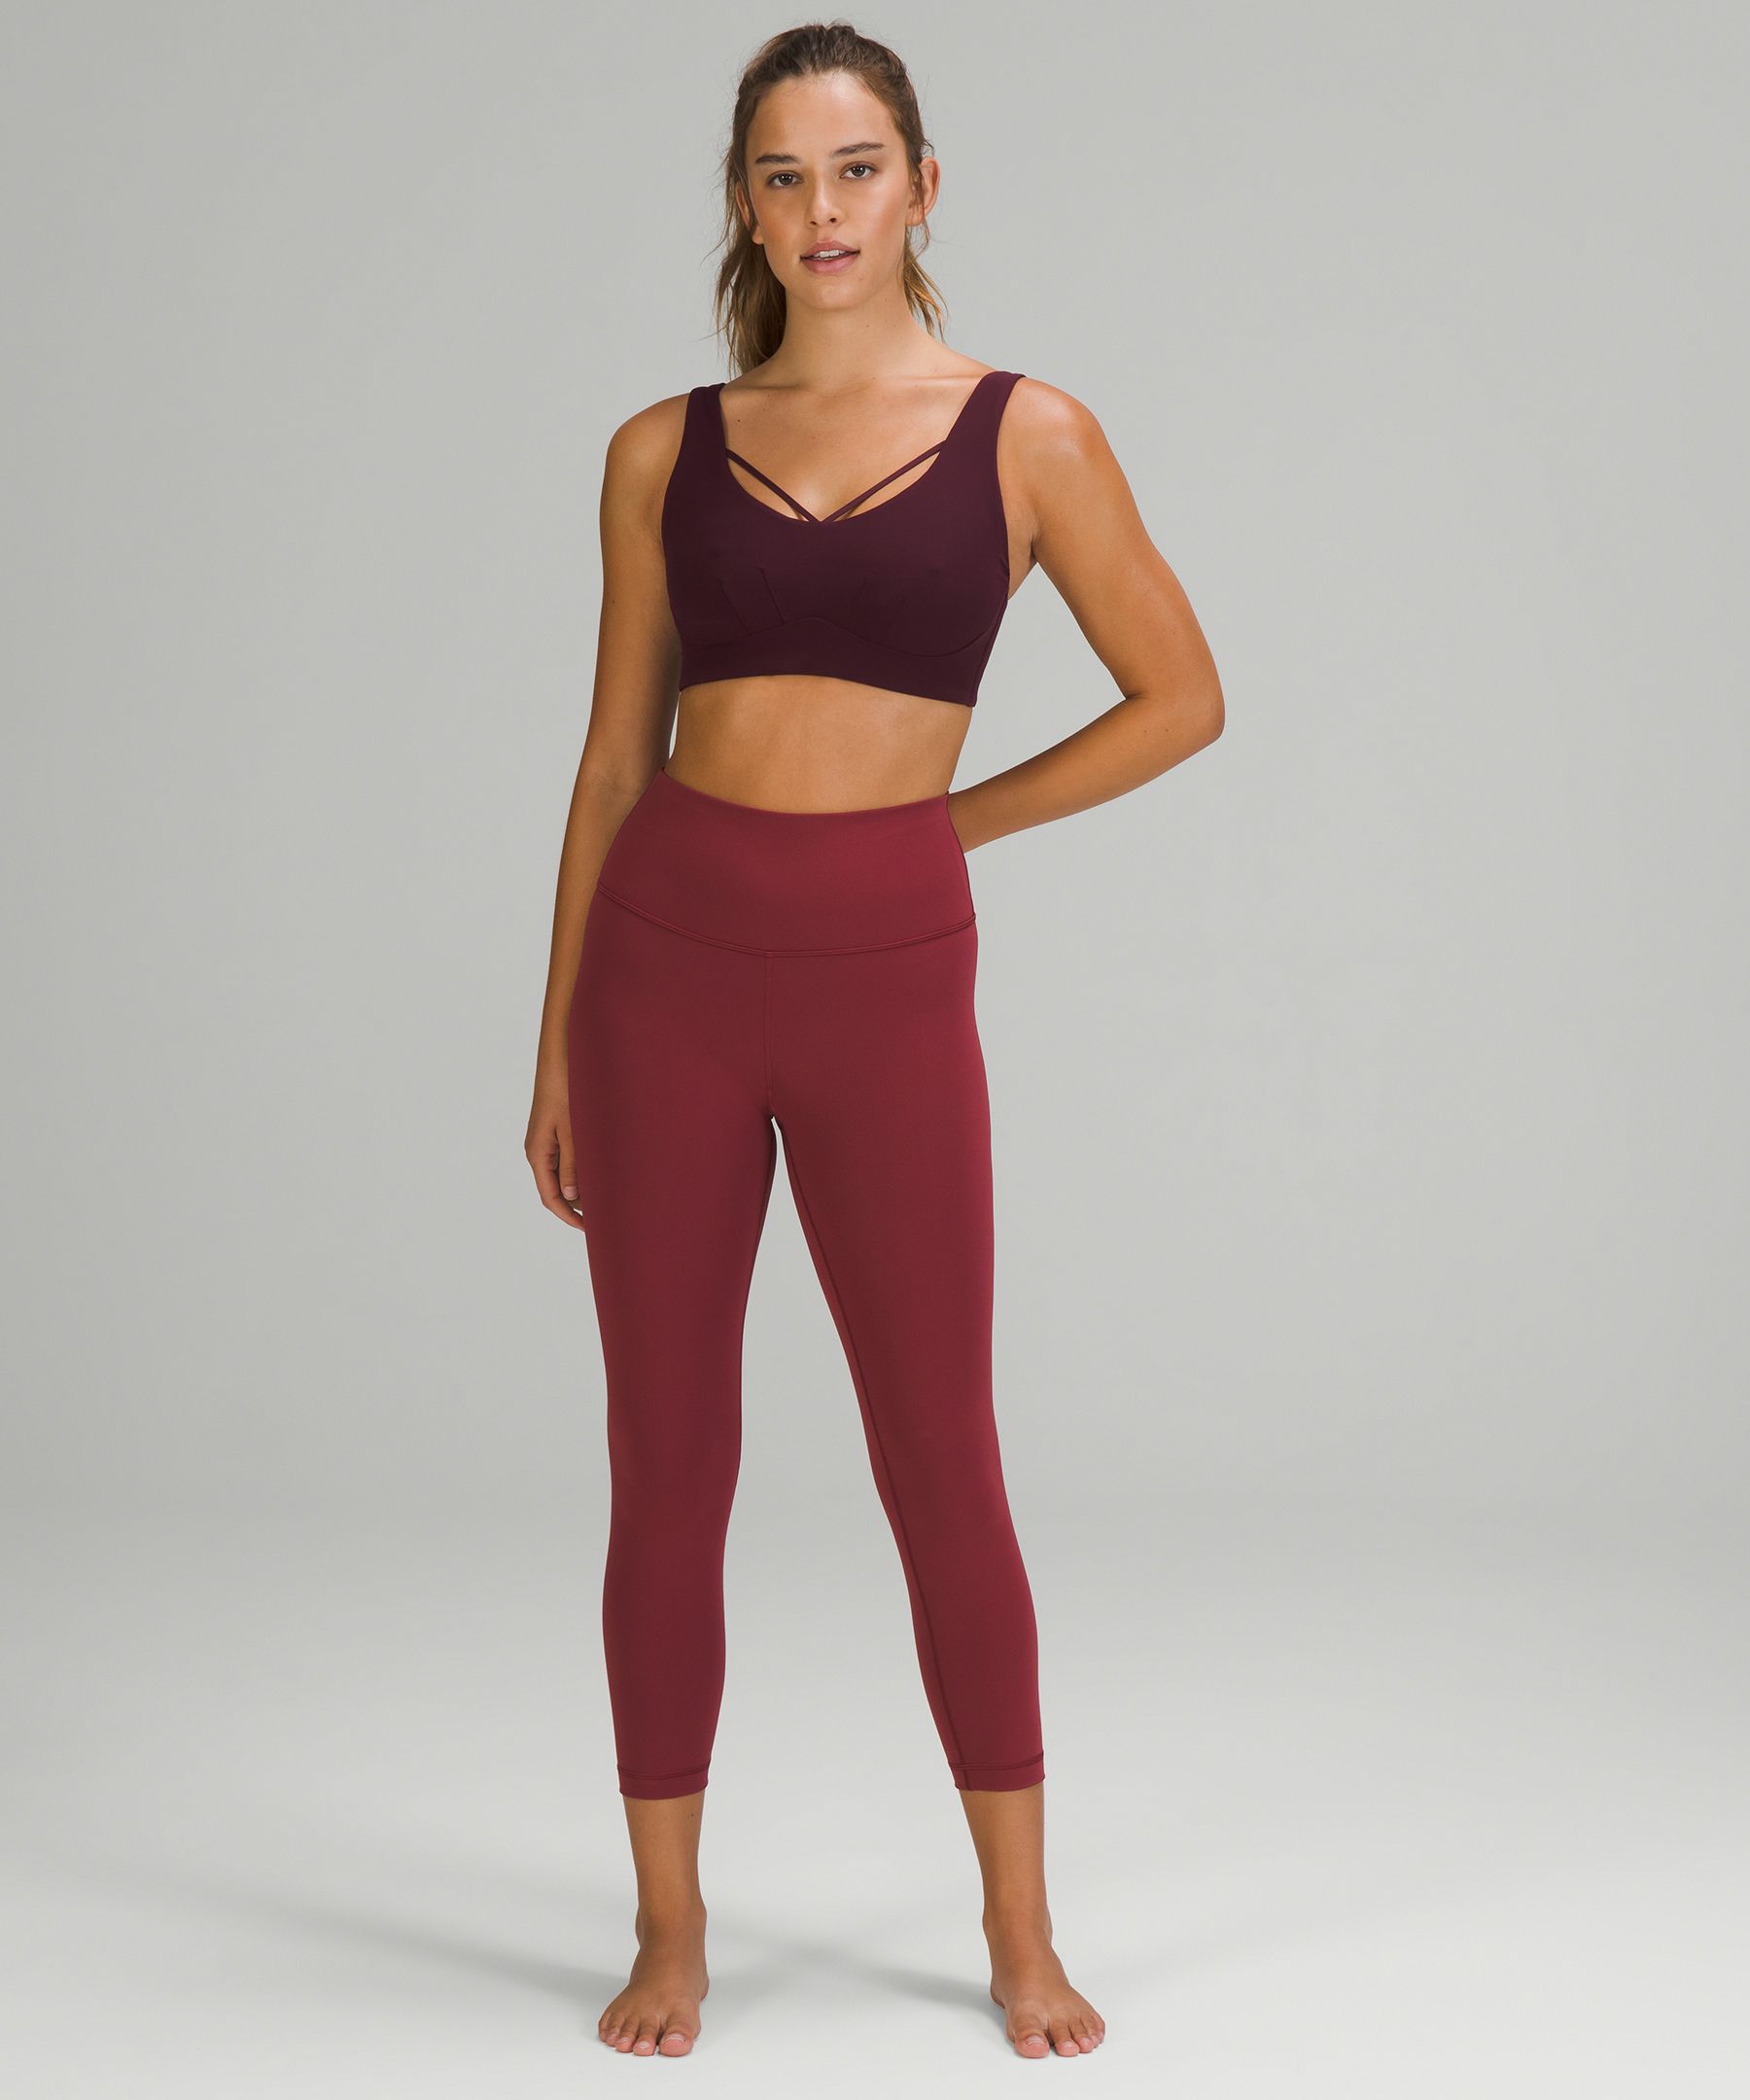 Lululemon Nulu Strappy Yoga Bra Light Support, size 6 - $55 New With Tags -  From Stephanie